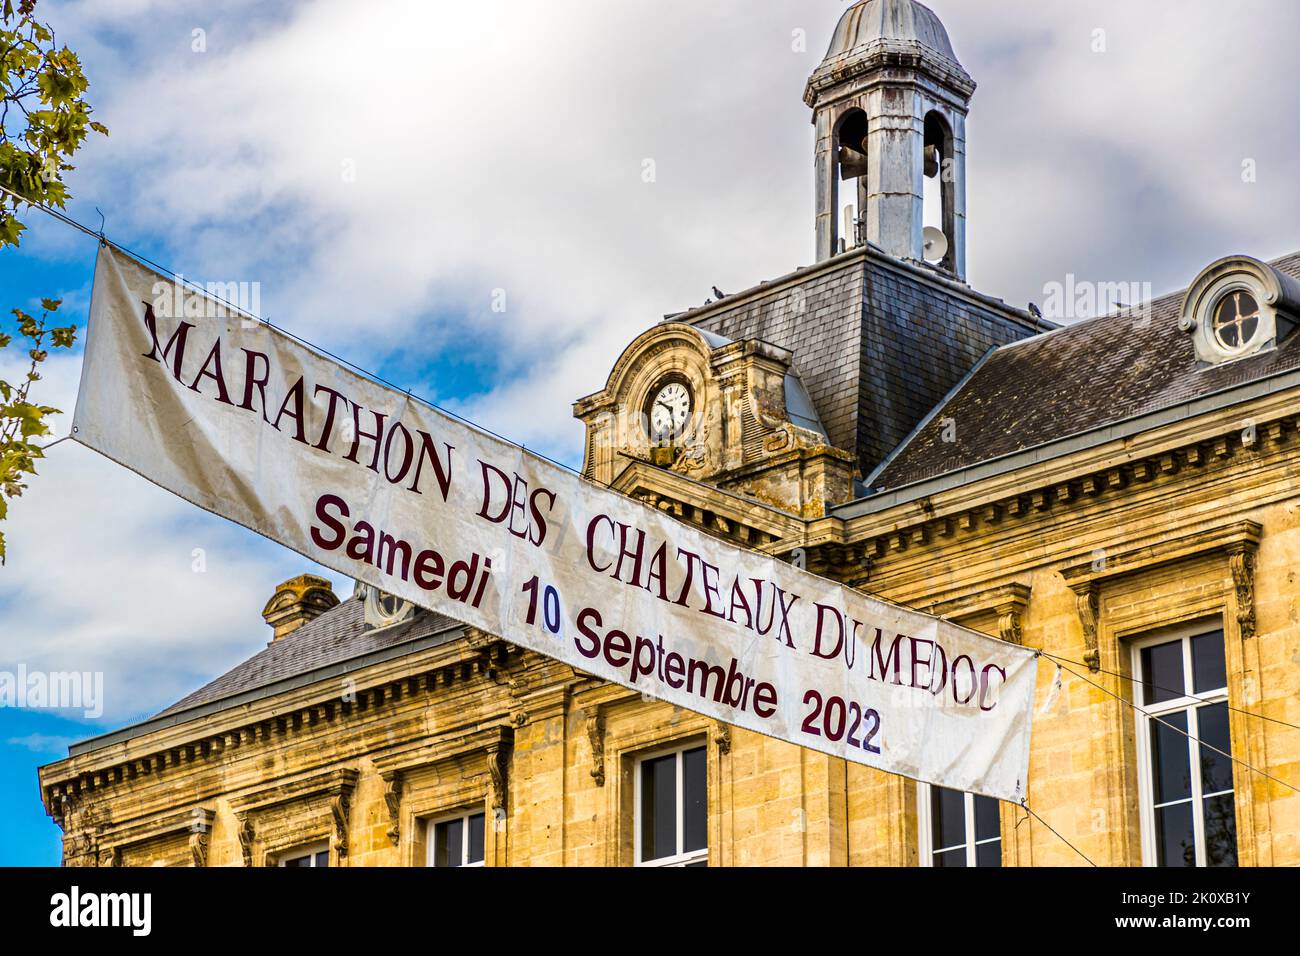 The Marathon des Chateaux du Medoc starts every year on the second Saturday of September in Pauillac, France Stock Photo